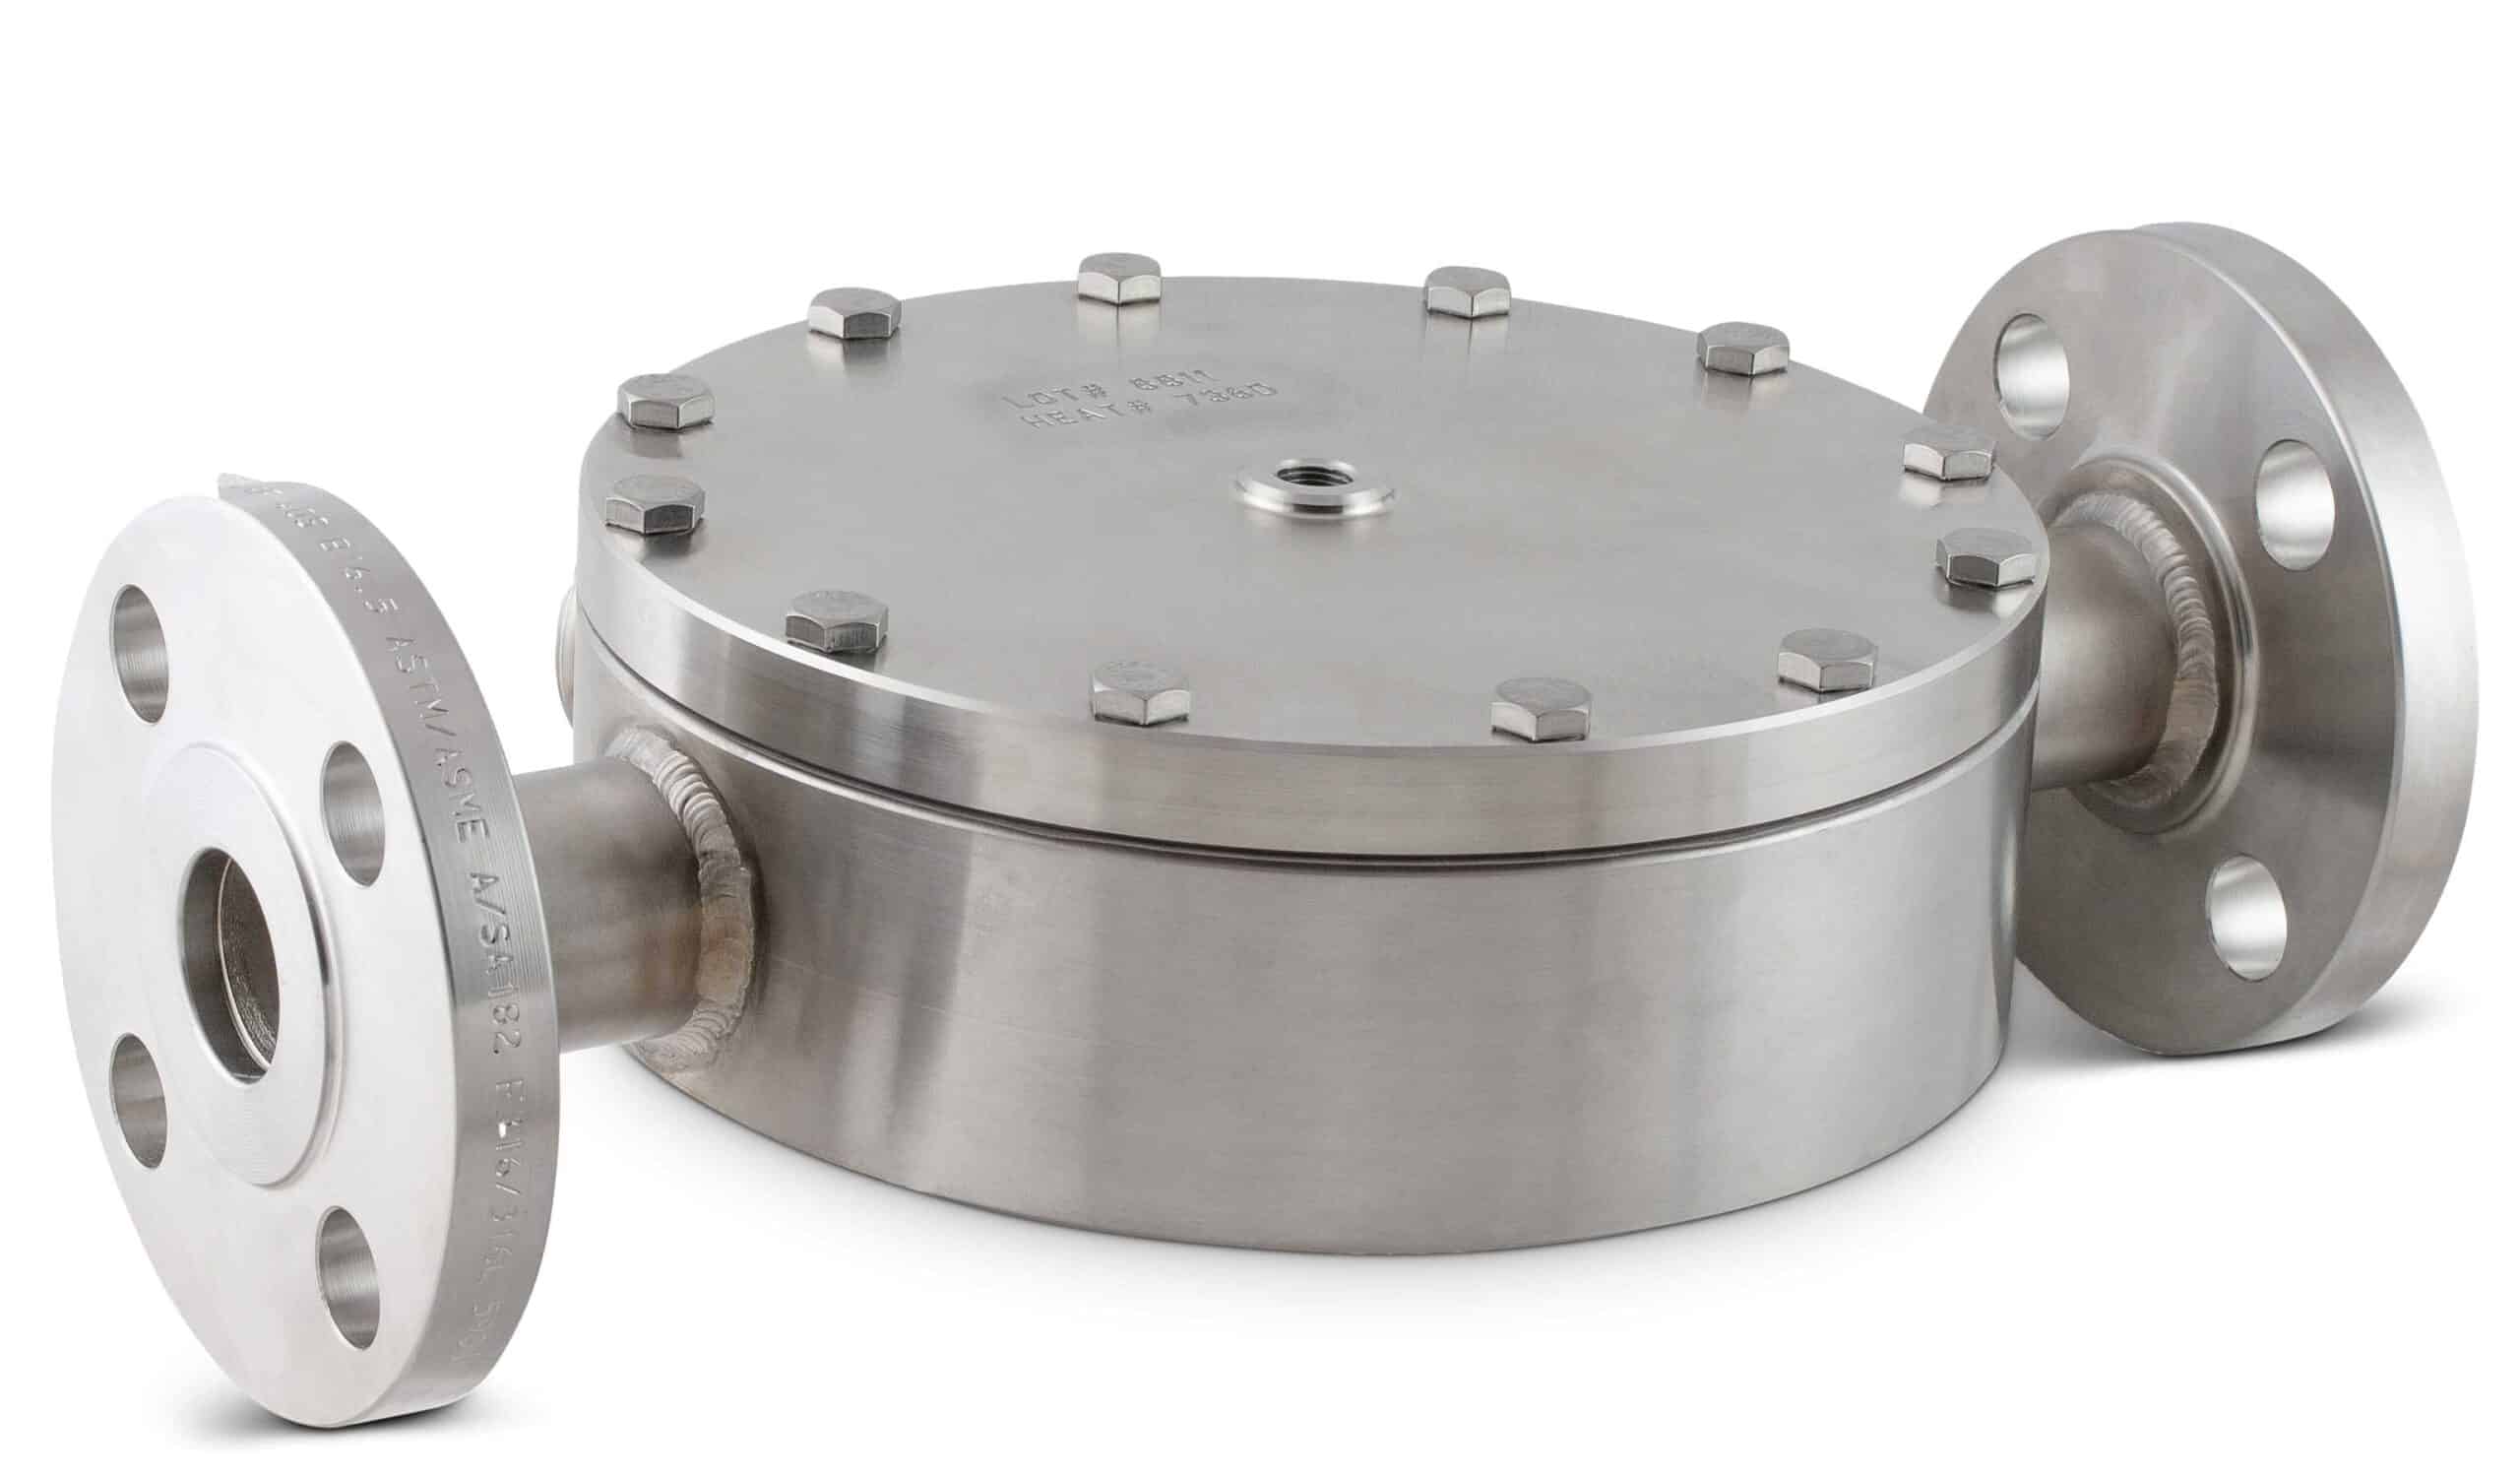 PCS will show Equilibar valve samples that were specifically designed for hydrogen production